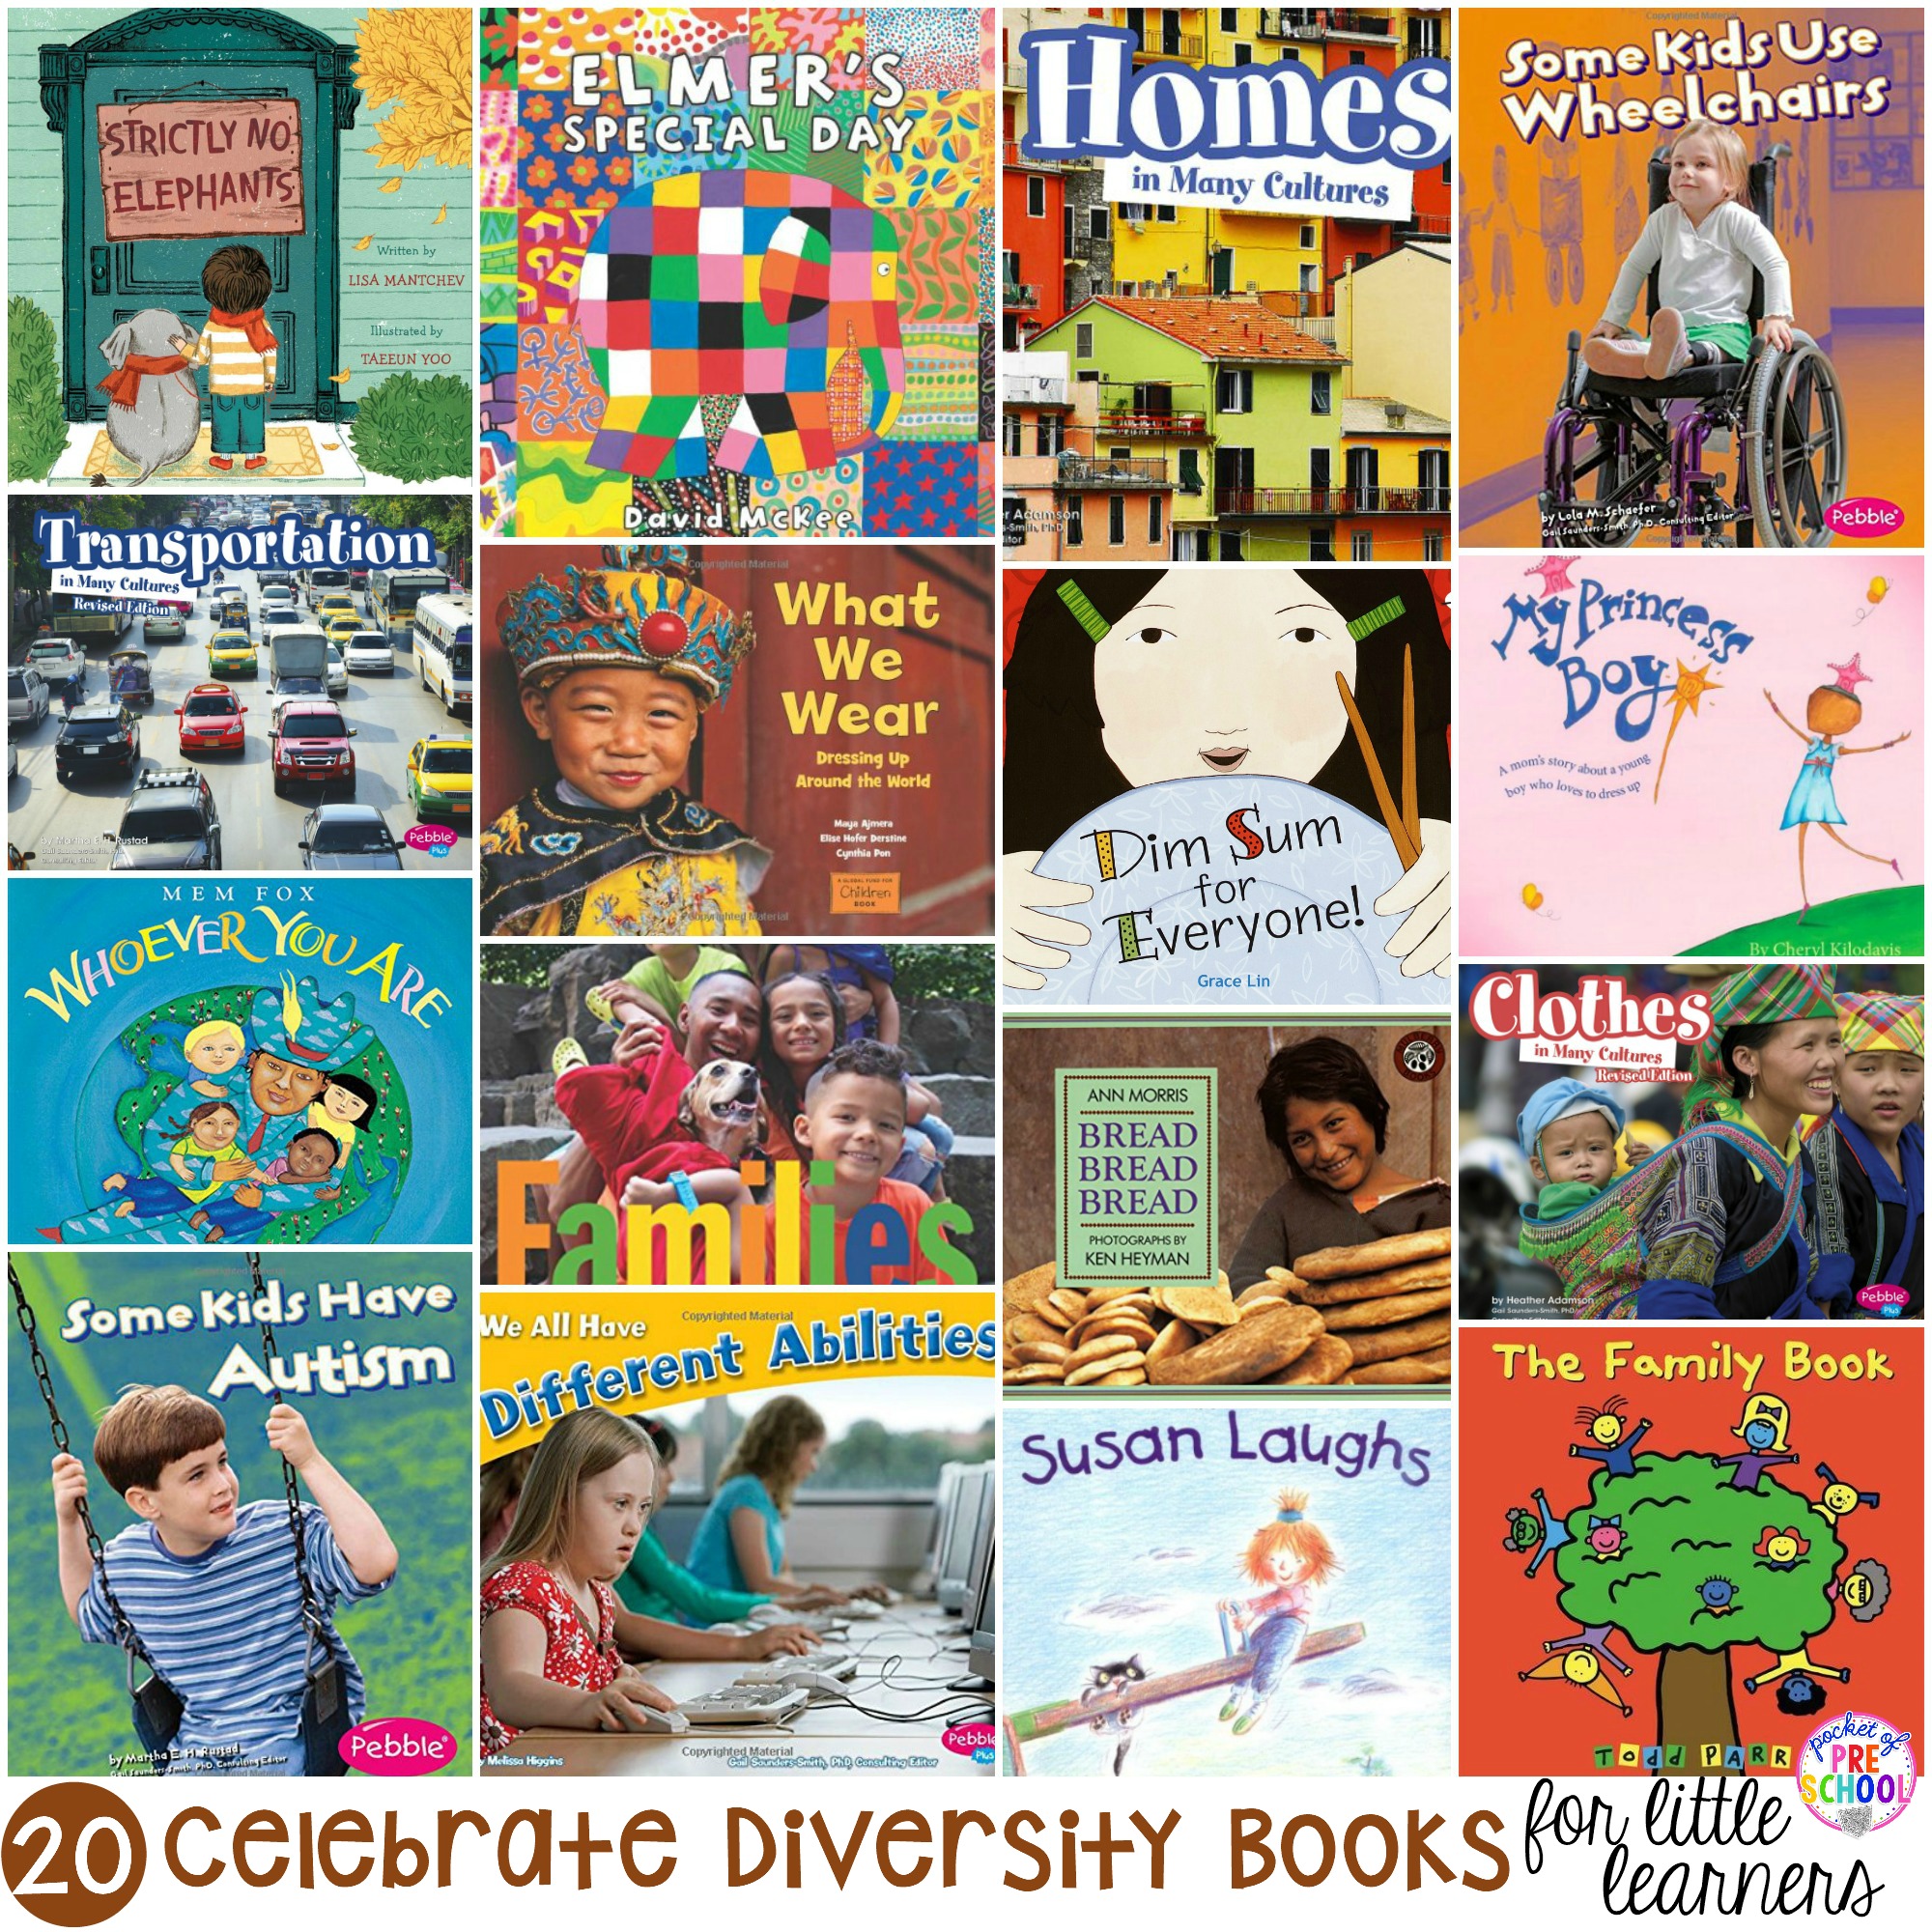 Celebrate diversity book list! Some of my favorite books to teach and celebrate diversity with preschool, pre-k, and kindergarten students.